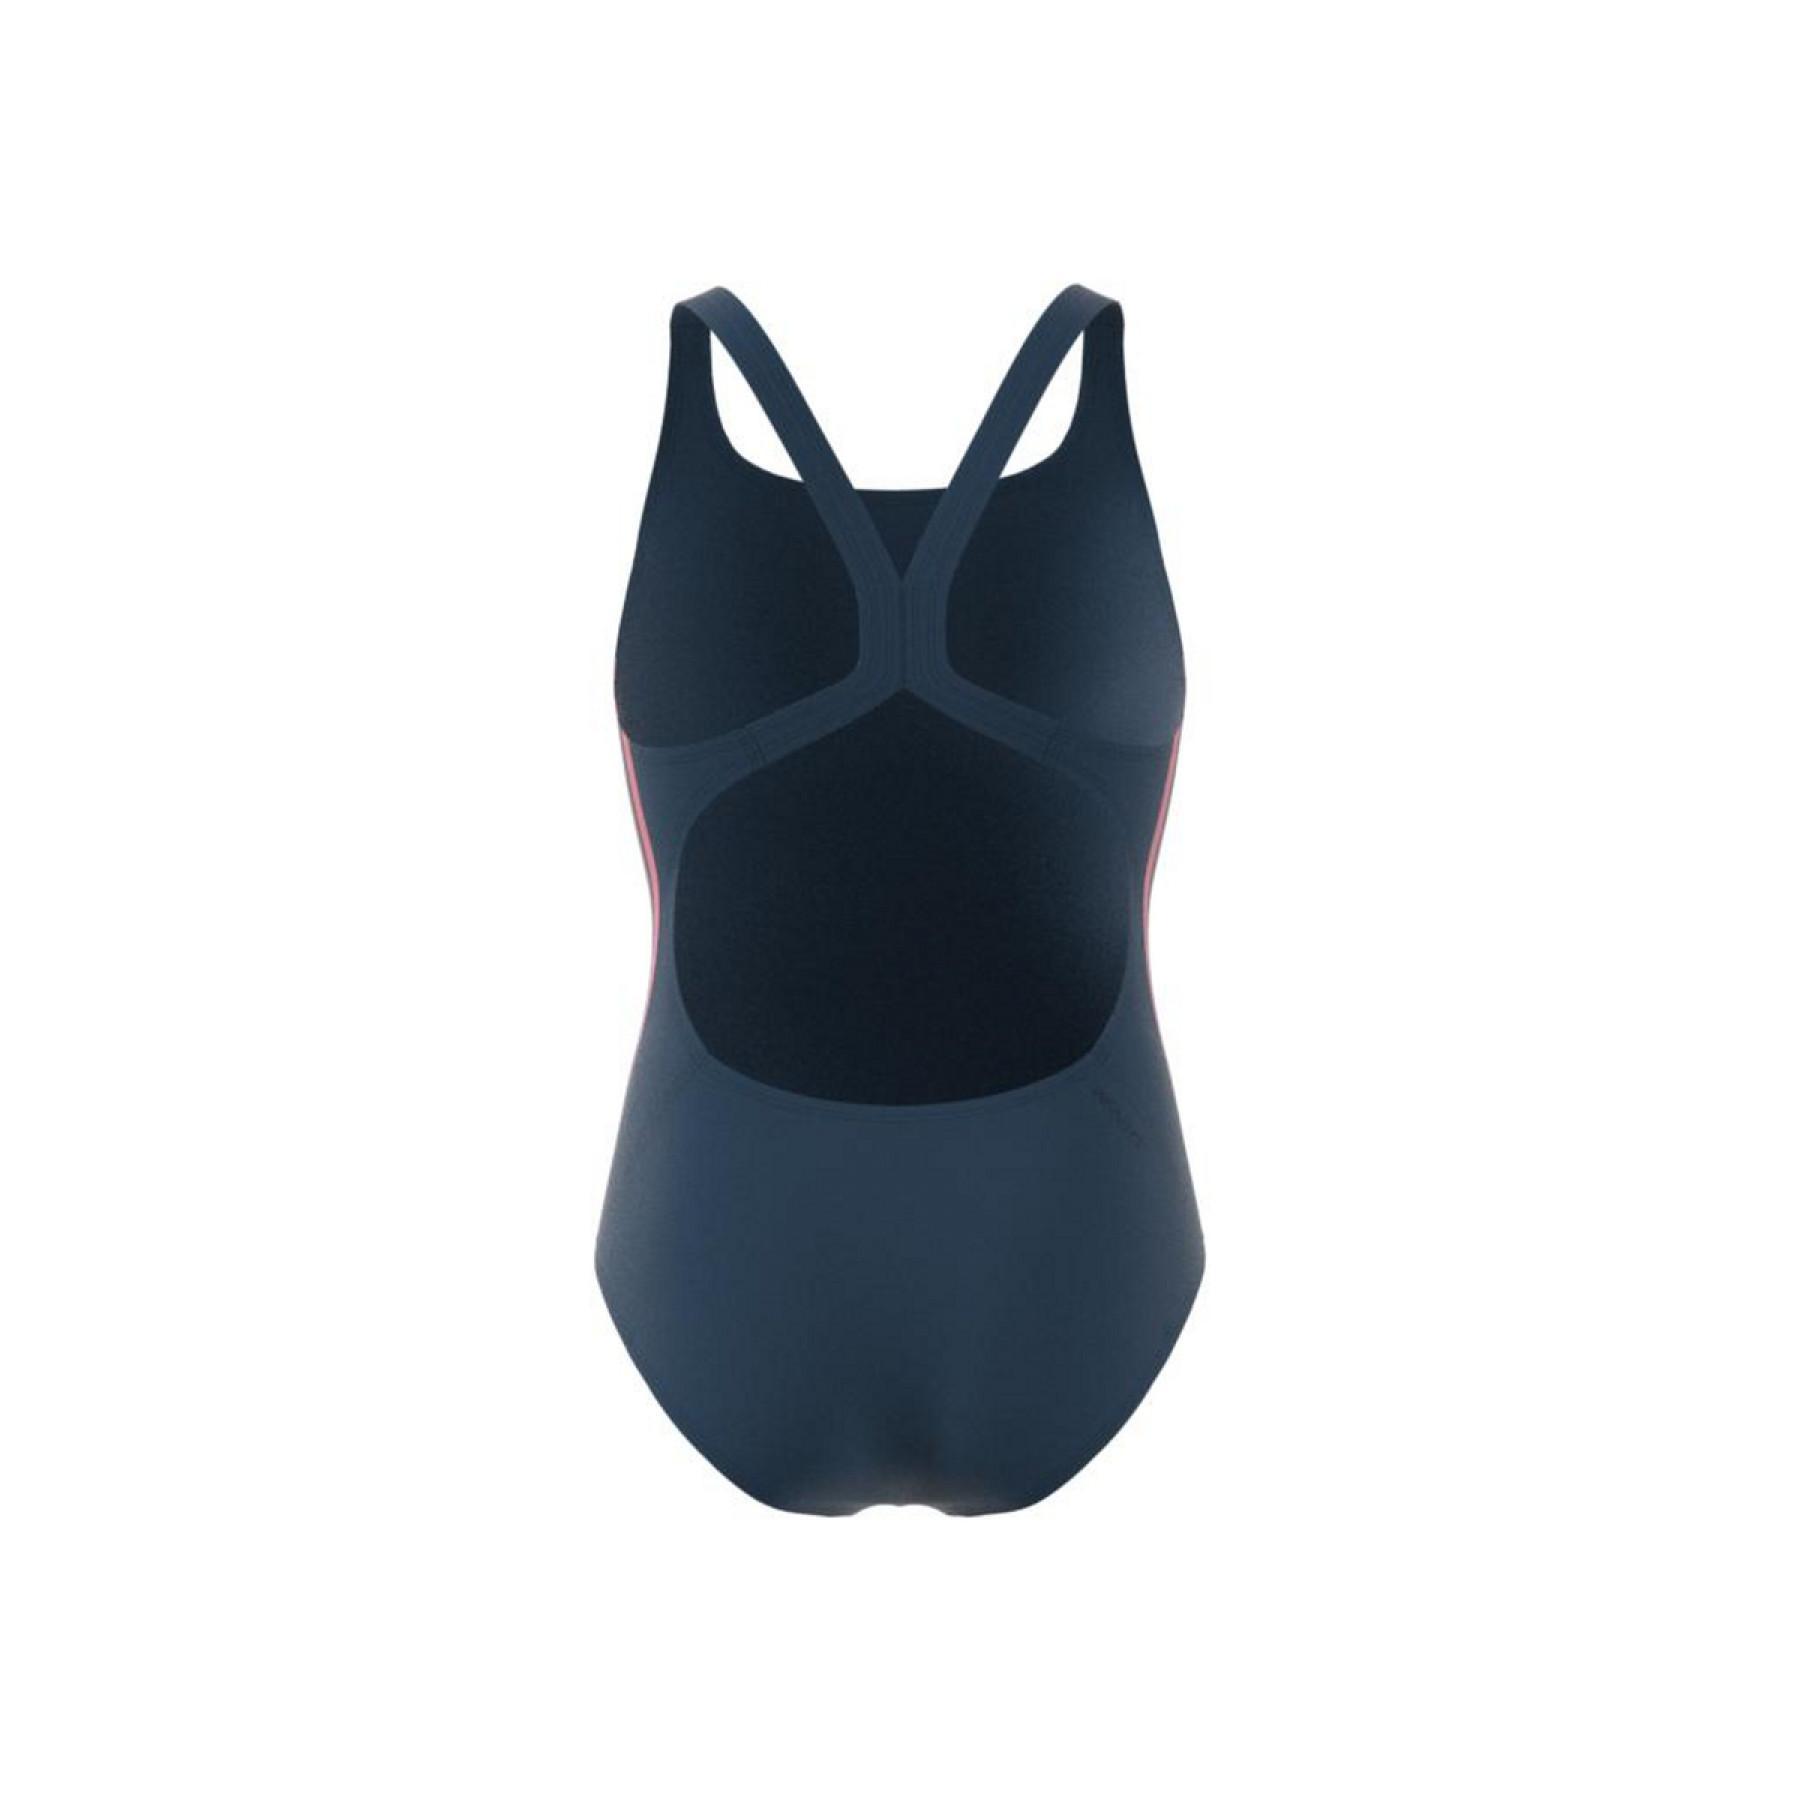 Children's swimsuit adidas Athly V 3-Bandes